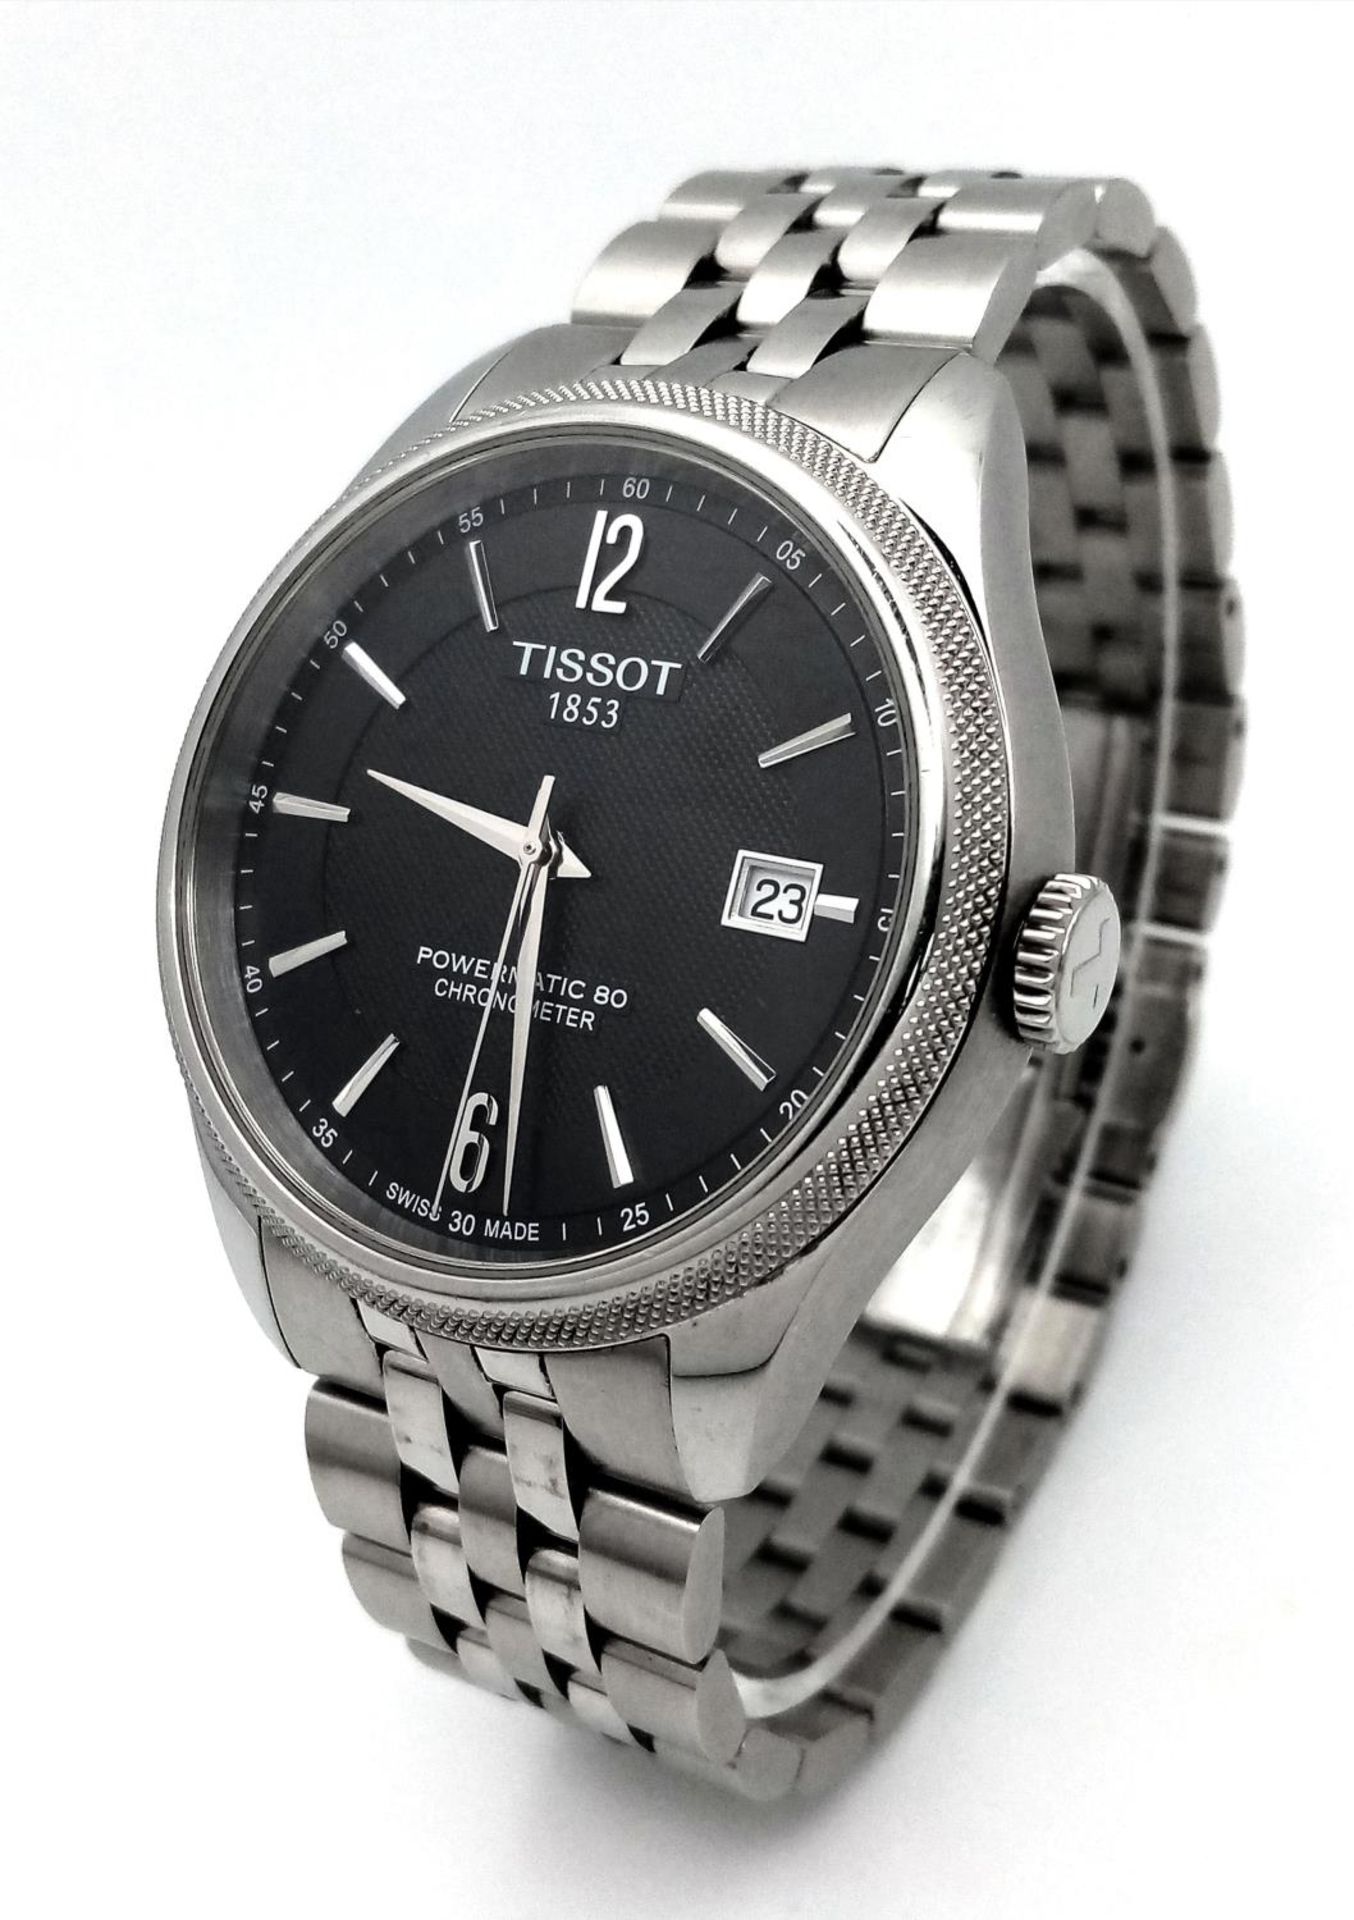 A Tissot Powermatic 80 Gents Watch. Stainless steel bracelet and case - 41mm. Black dial with date - Bild 3 aus 28